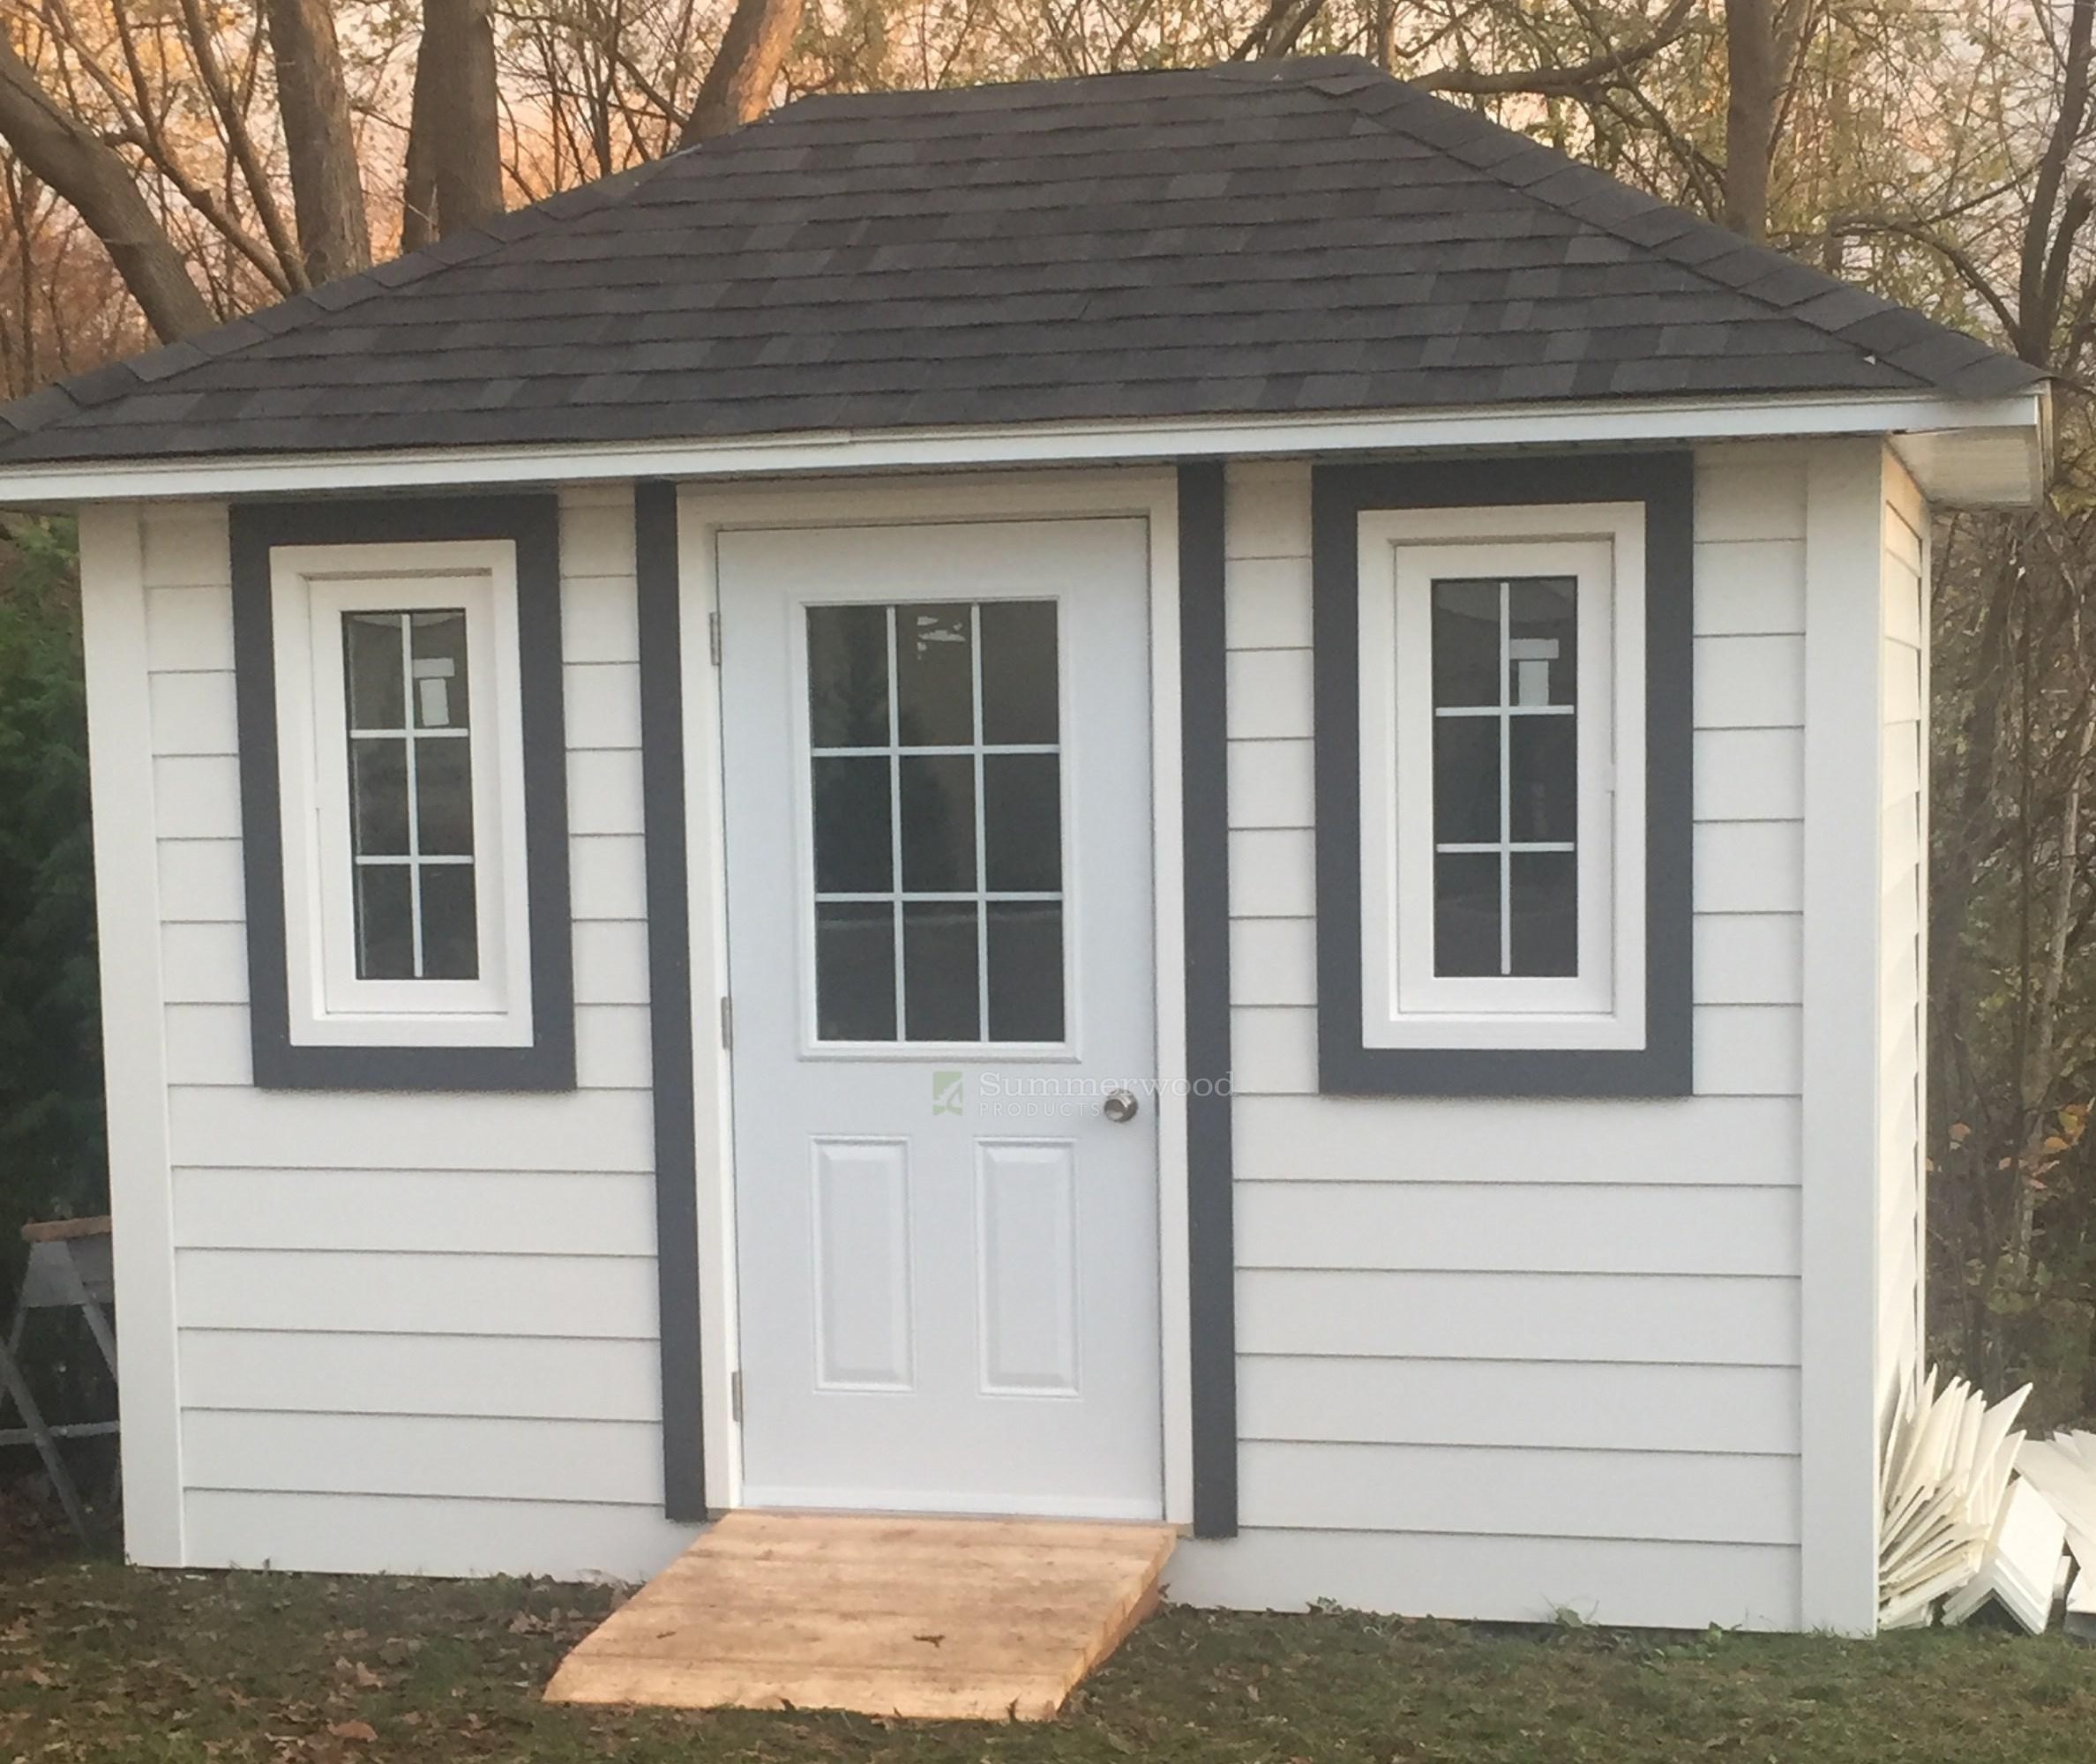 Canexel Sonoma 8ft x 12ft Garden Shed located in Manotick, ON. ID number 220809